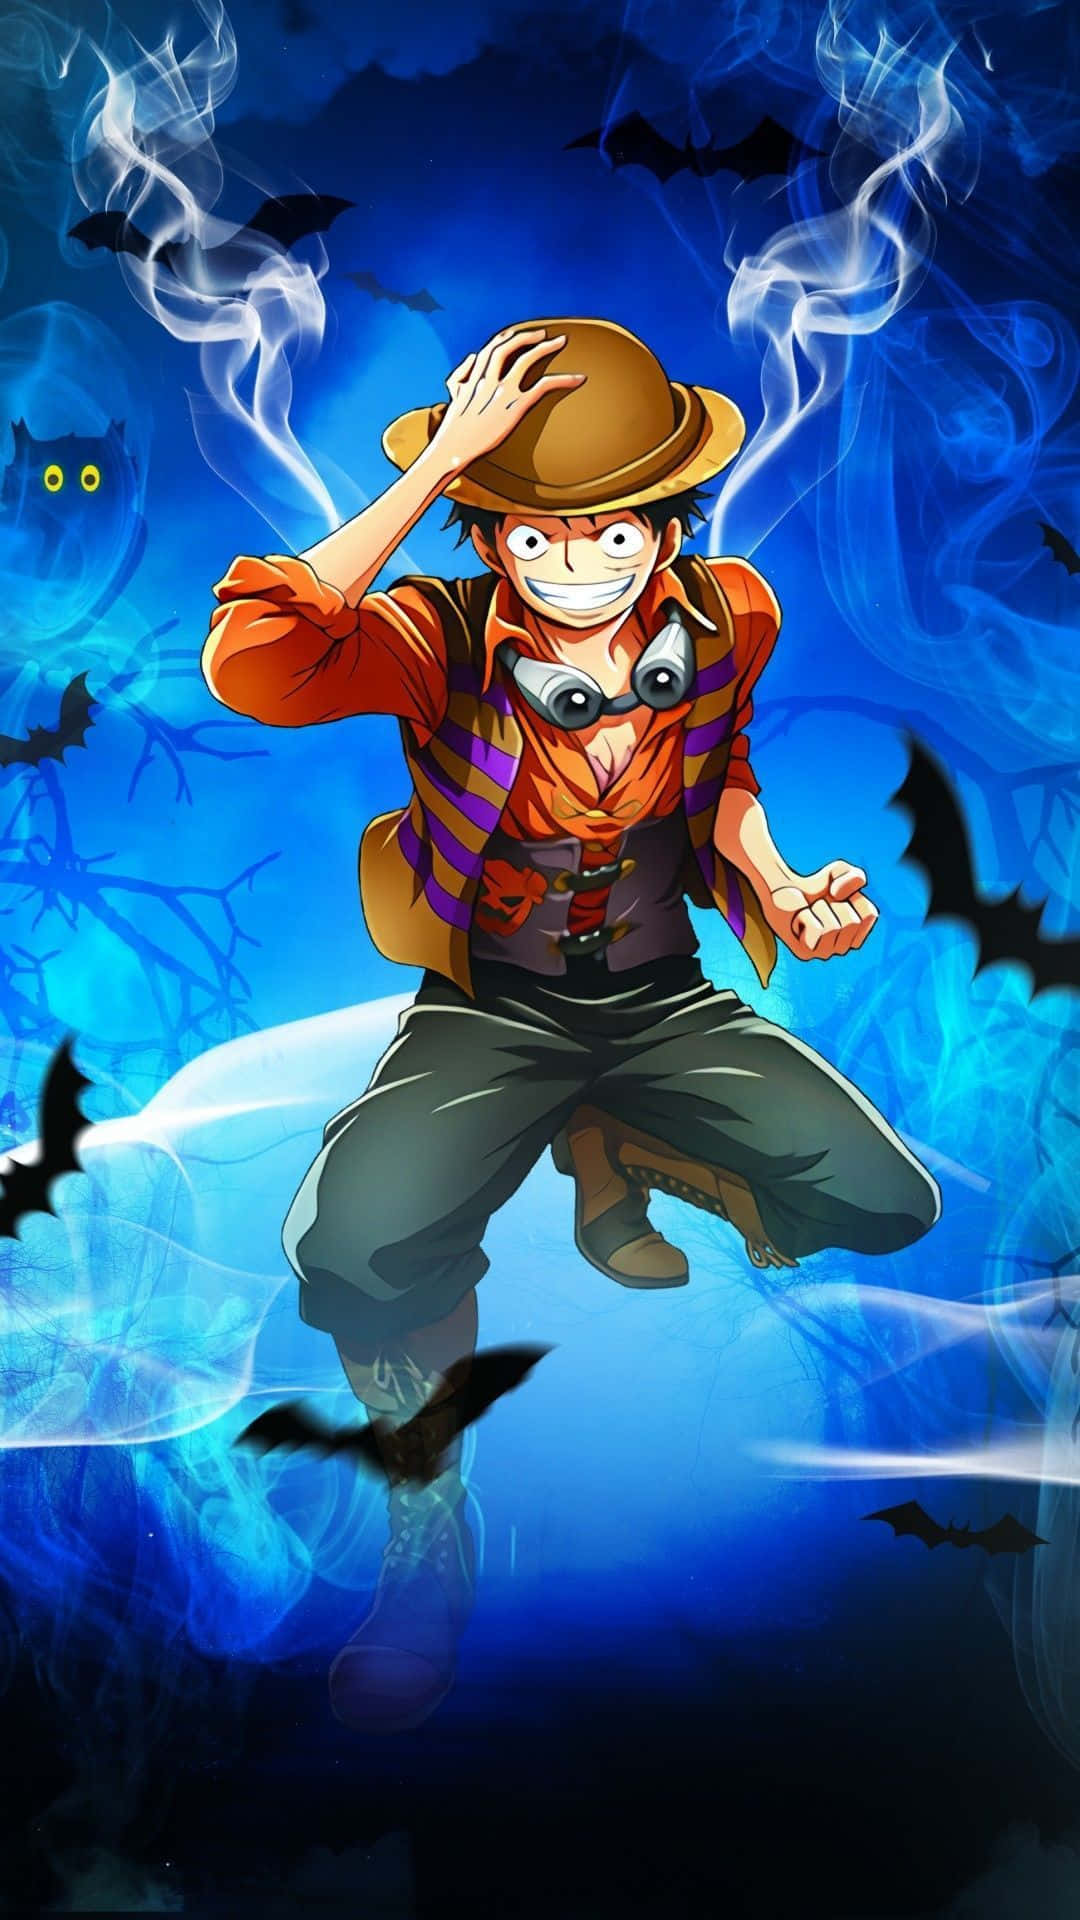 Join Luffy on his adventure with the One Piece Luffy Iphone! Wallpaper